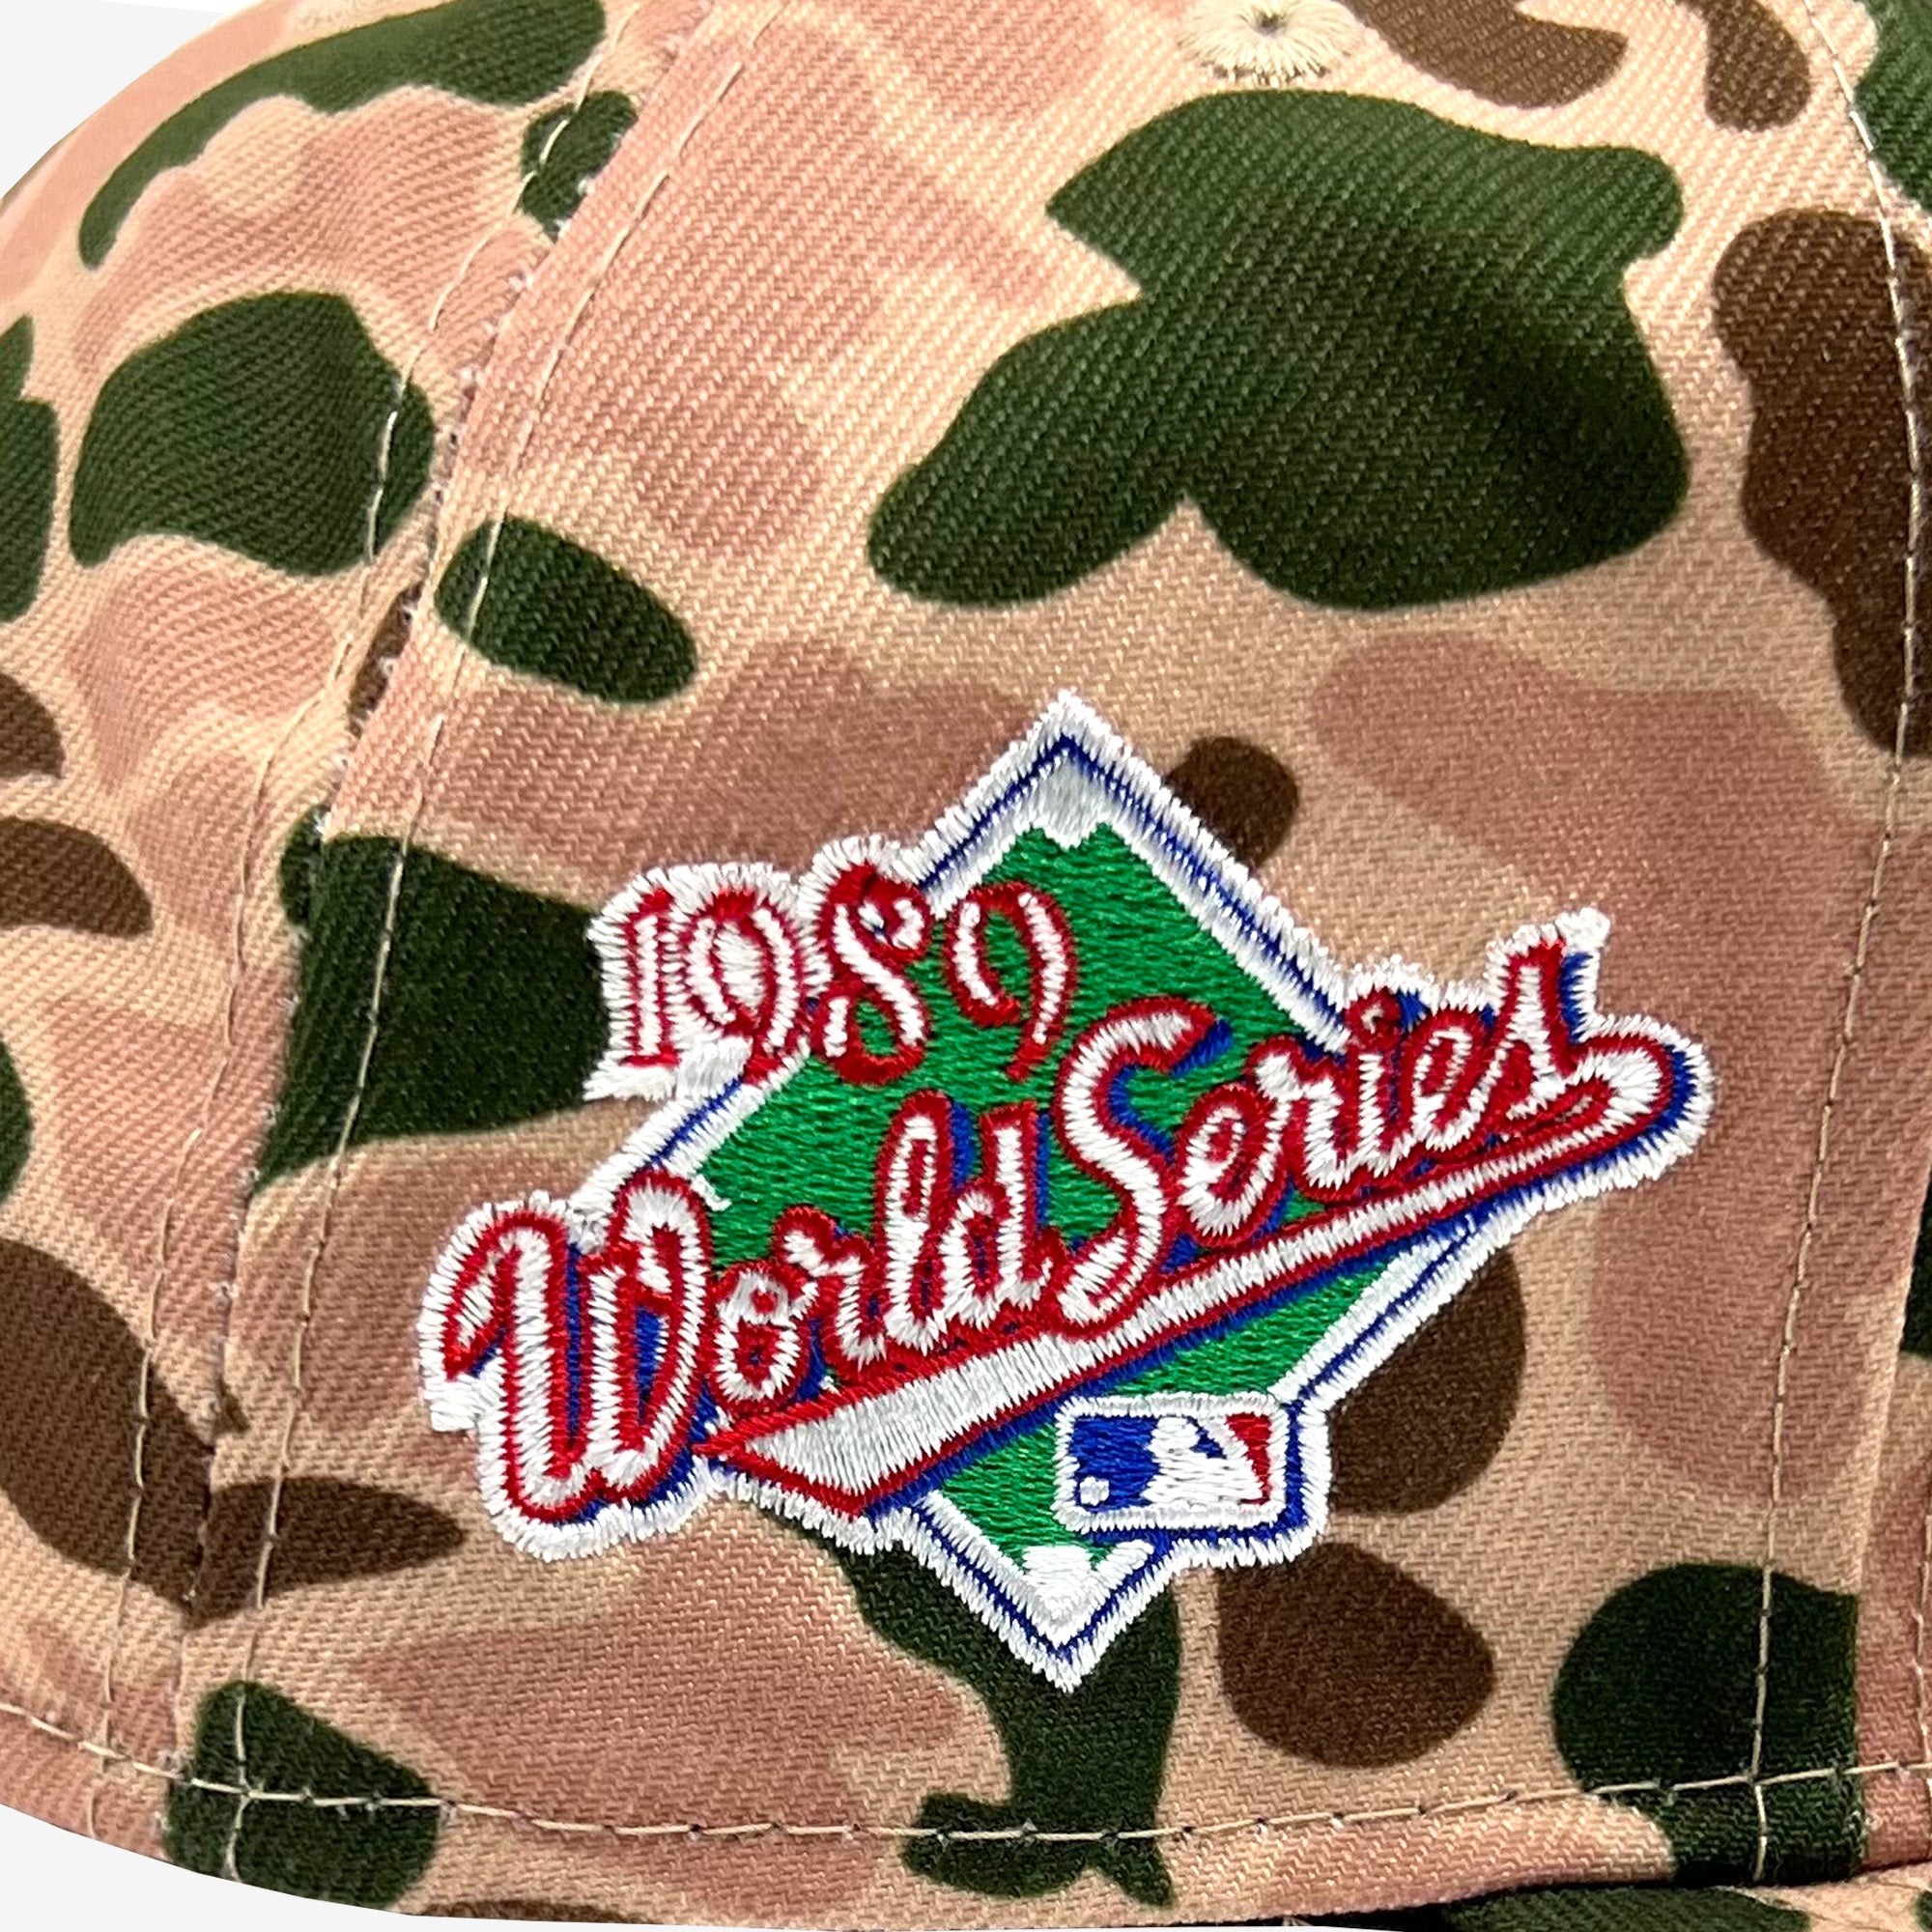 Detailed close-up of 1989 World Series embroidered patch on the side of a duck camo cap.